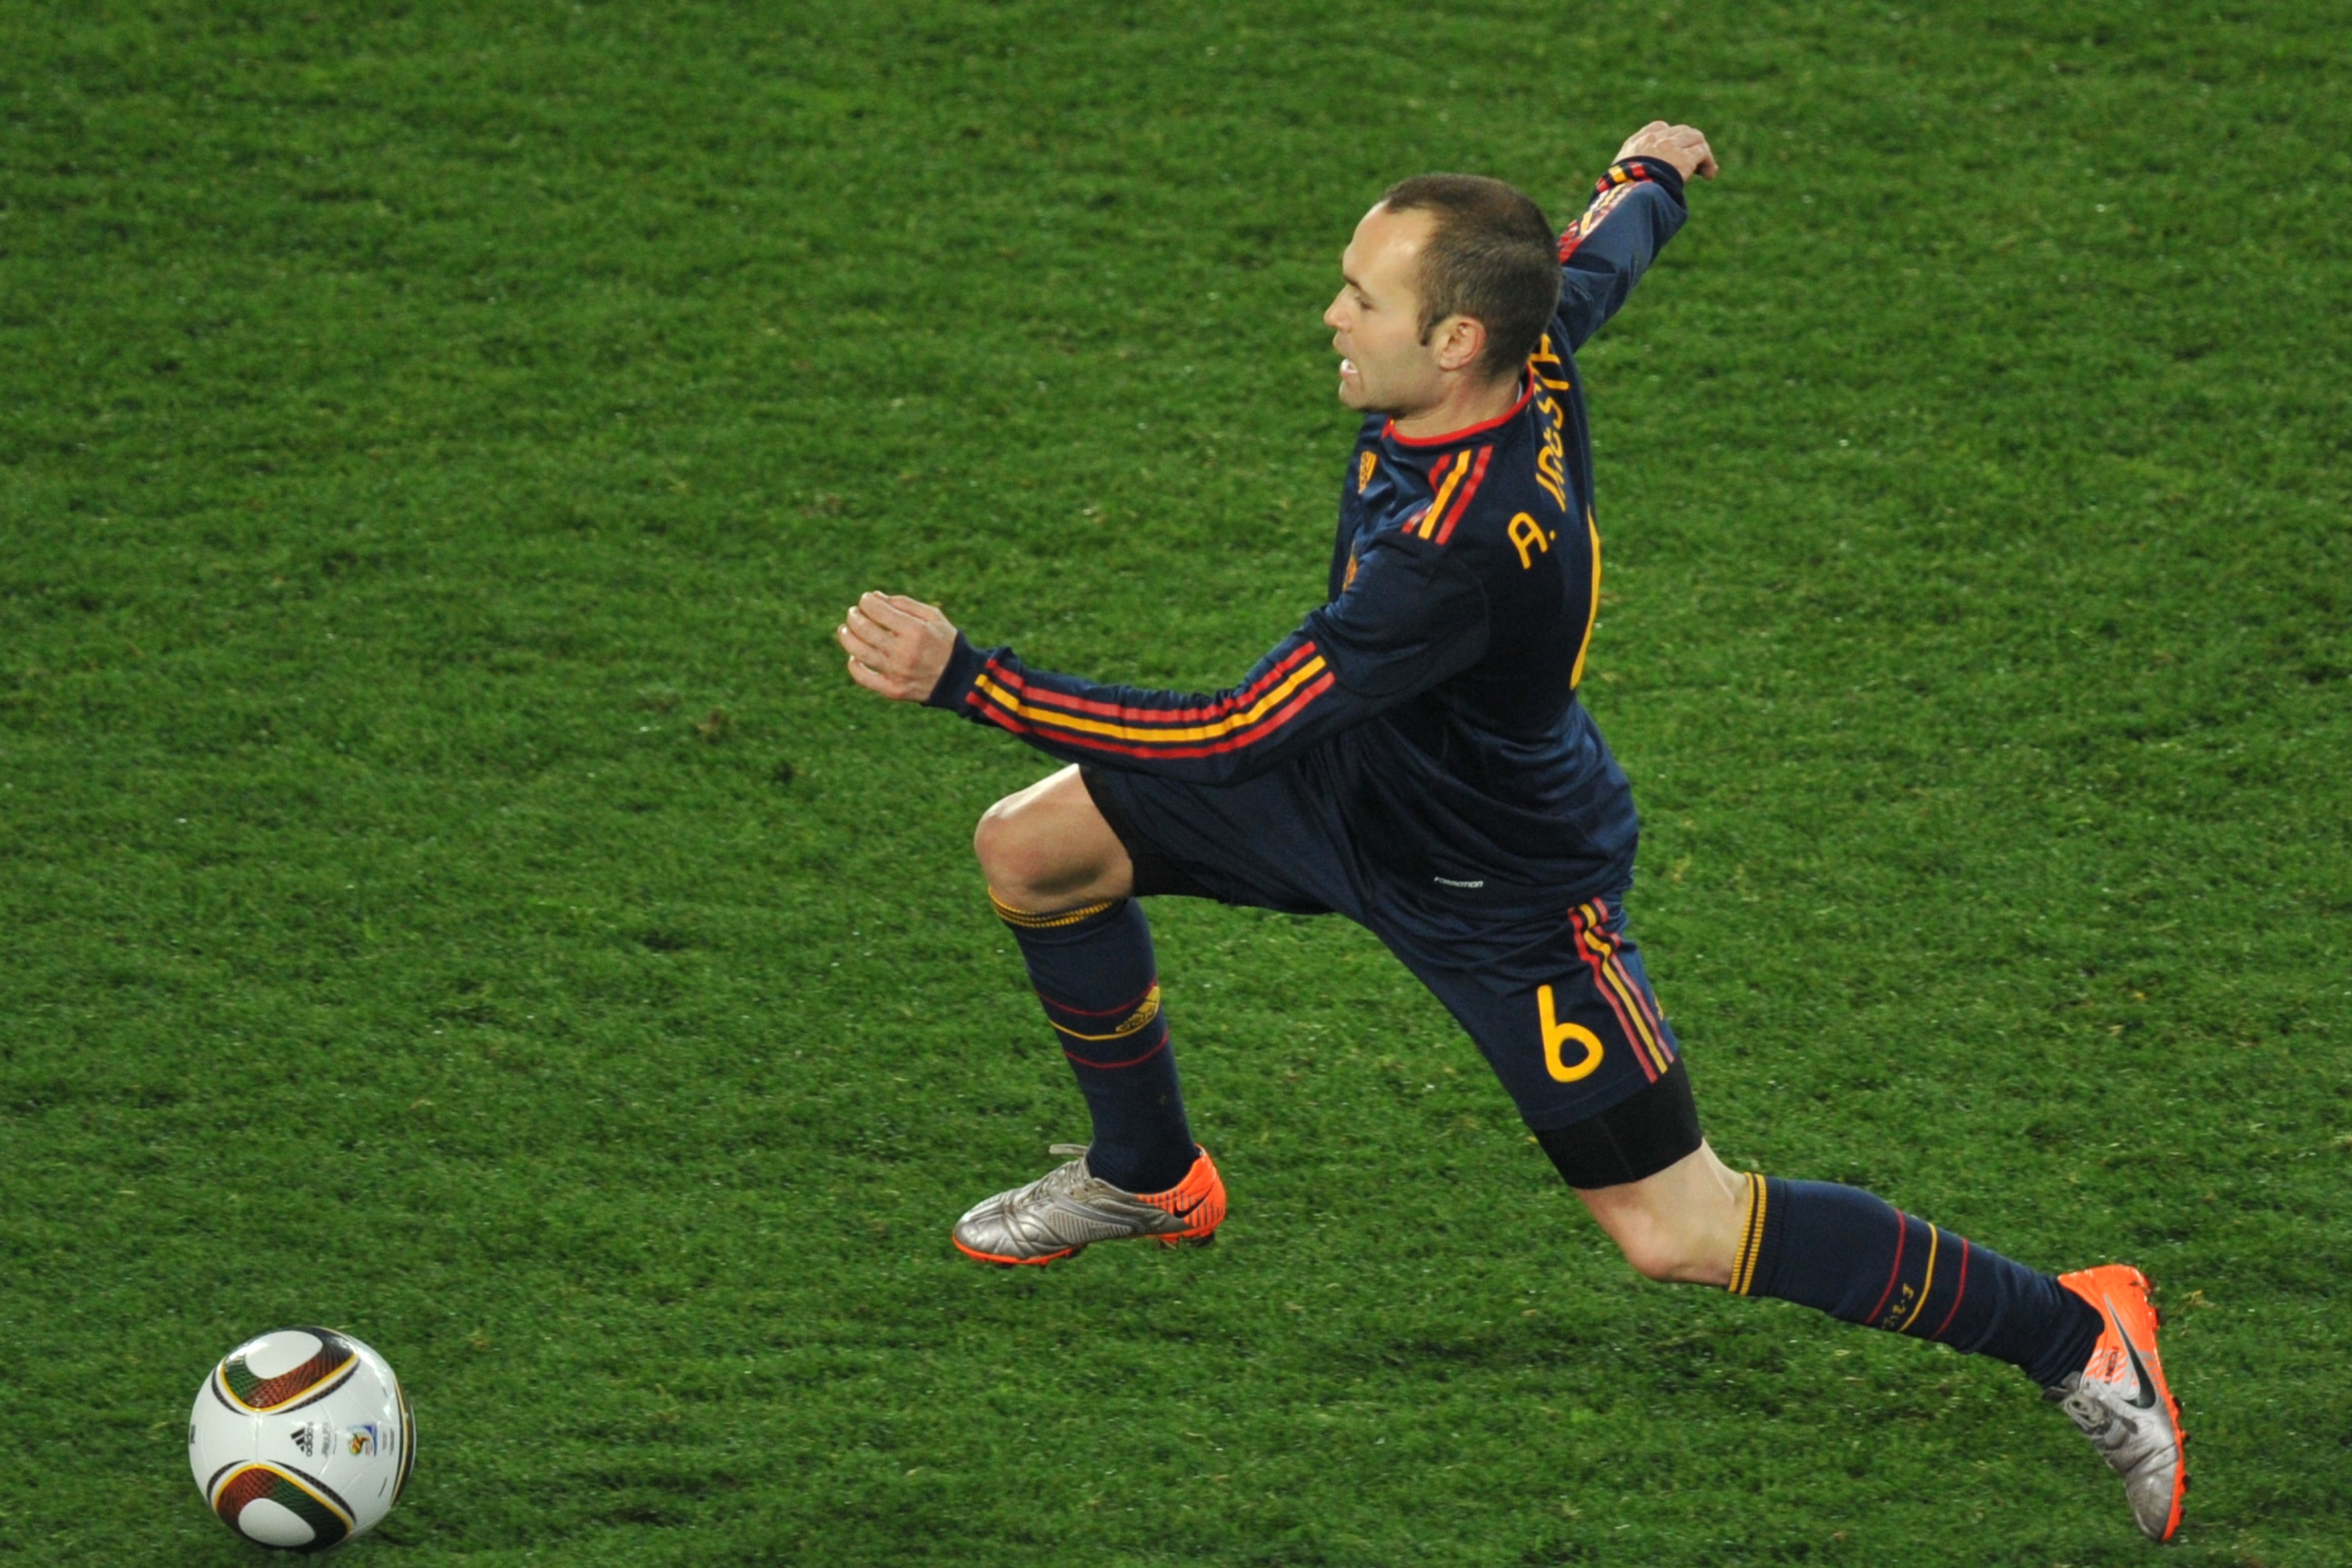 Andres Iniesta in action for Spain against Paraguay at the 2010 World Cup.